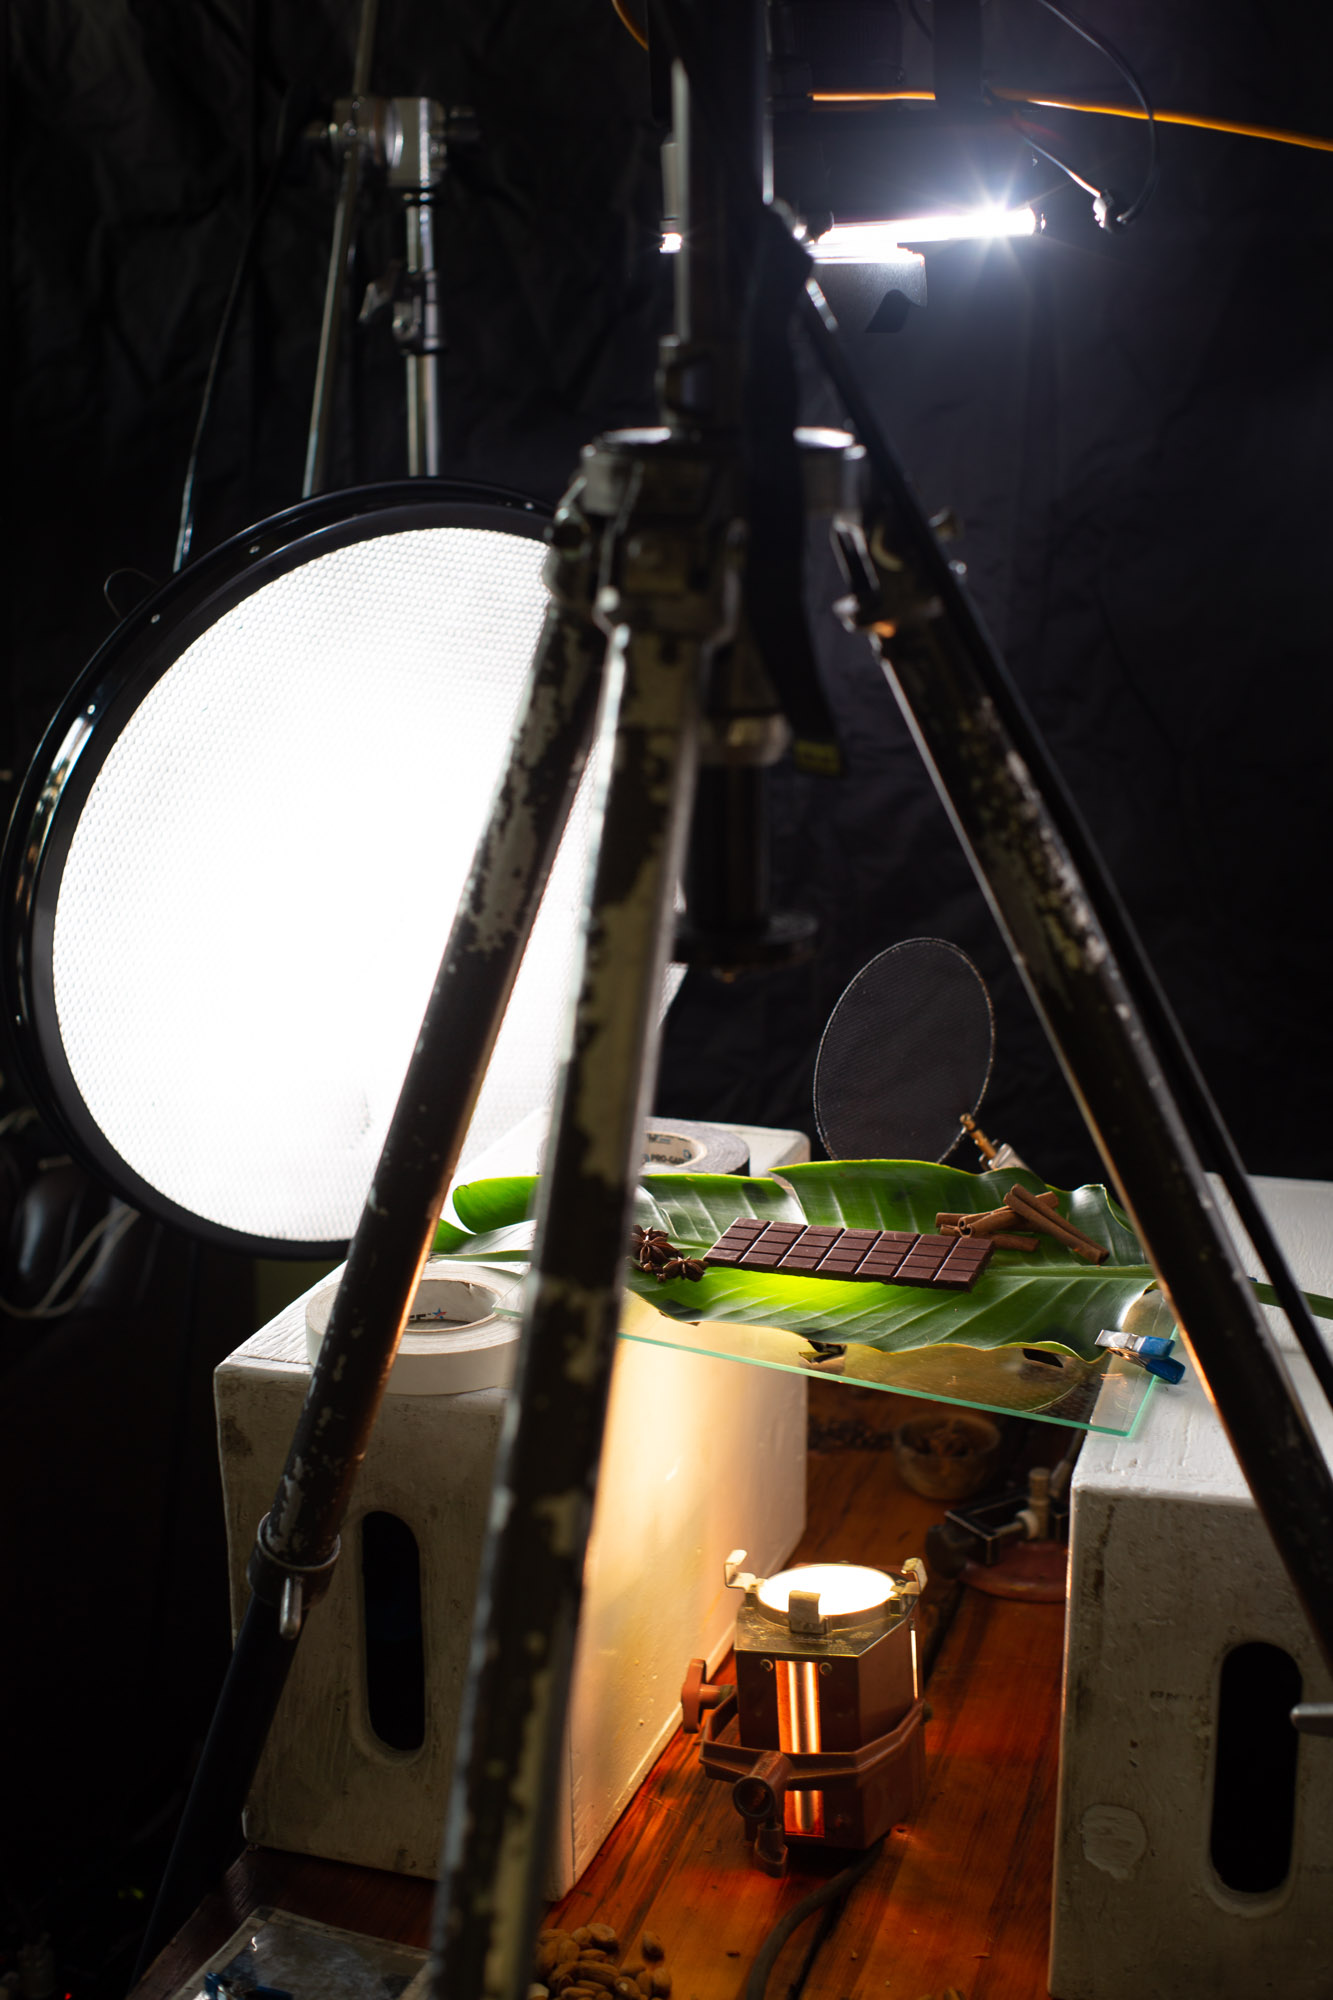 A look at the setup used to photograph the chocolate in studio